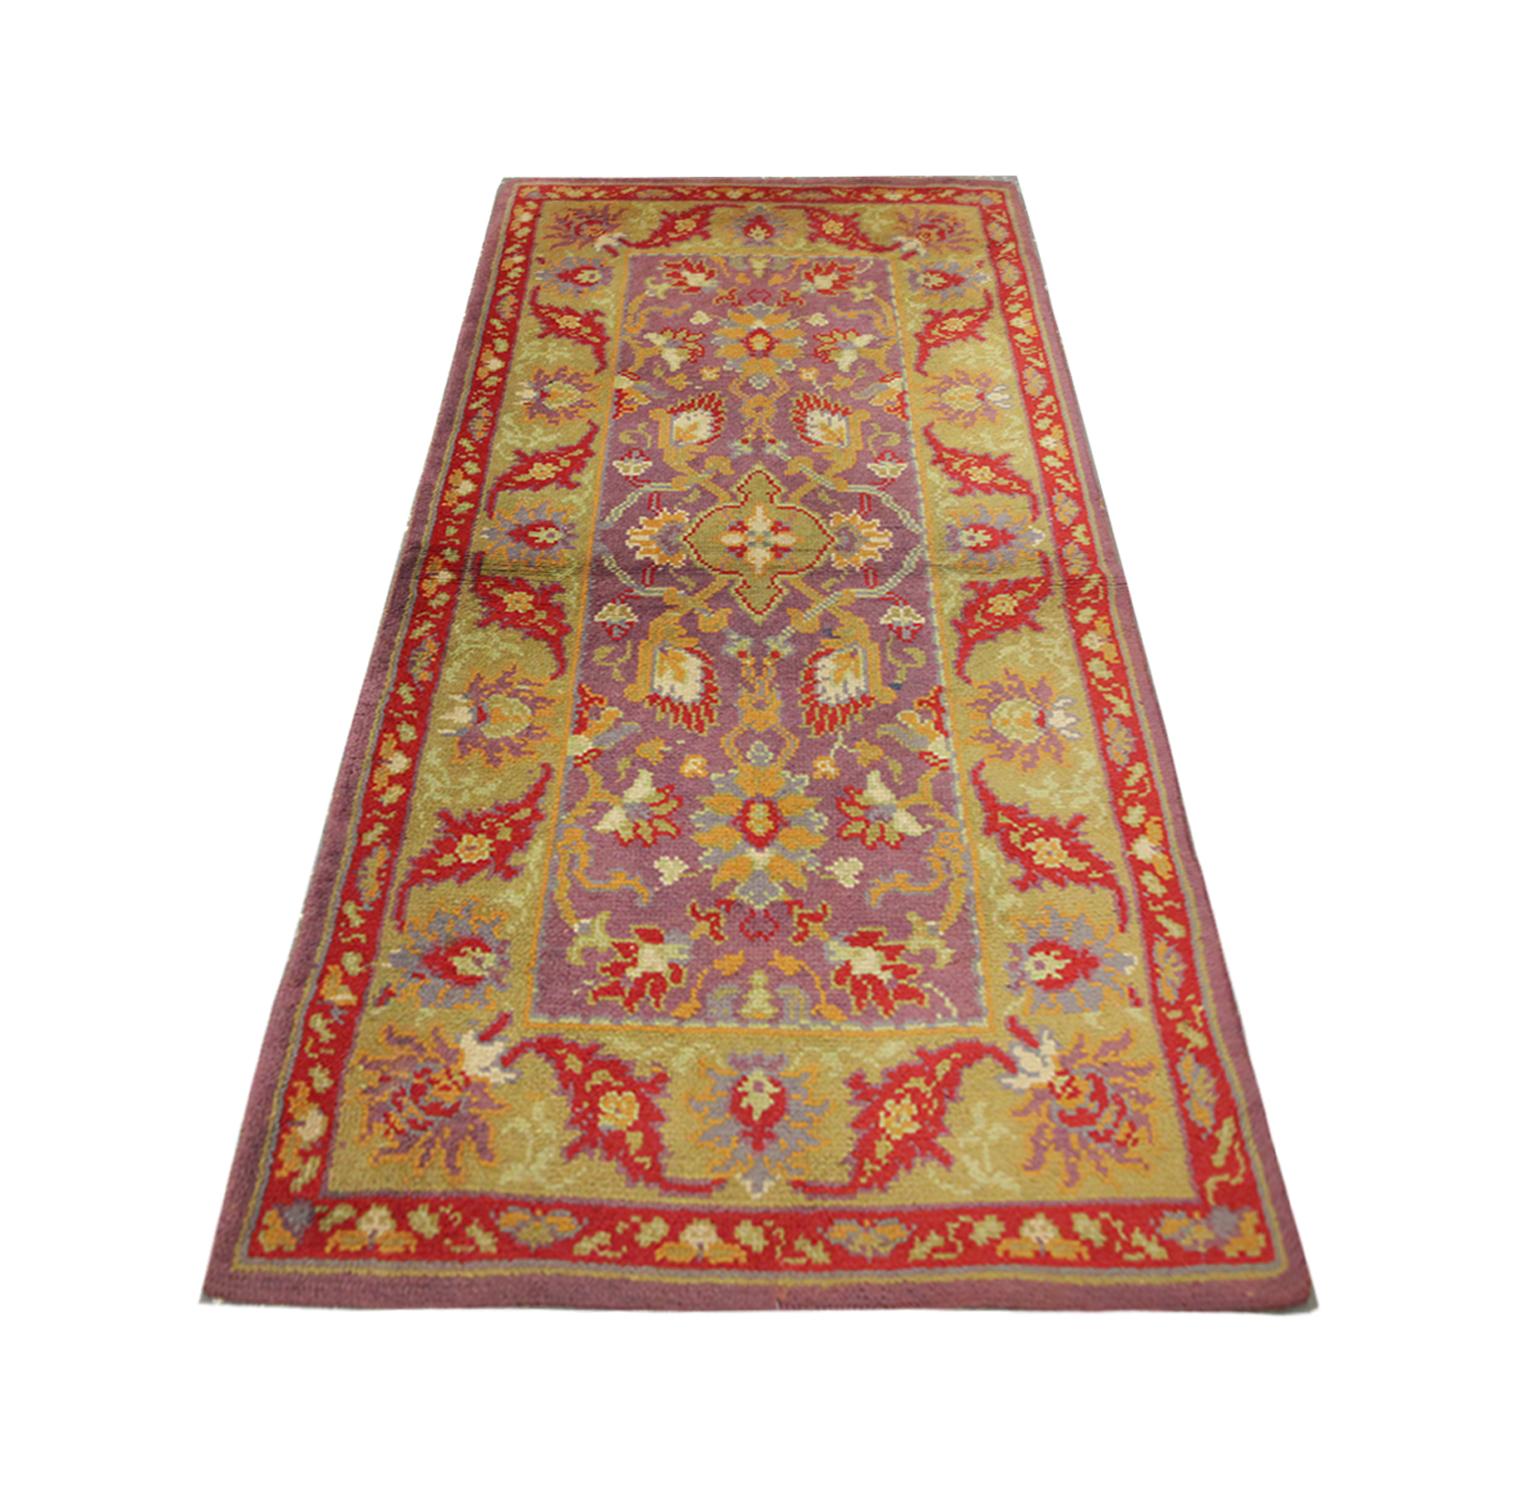 A Vibrant botanical design drenches these high-quality vintage British, Axminister rugs, with symmetrical floral motif designs, handwoven in 1980 with hand-spun, vegetable-dyed wool and cotton, by some of the finest British artisans. 
Perfect for